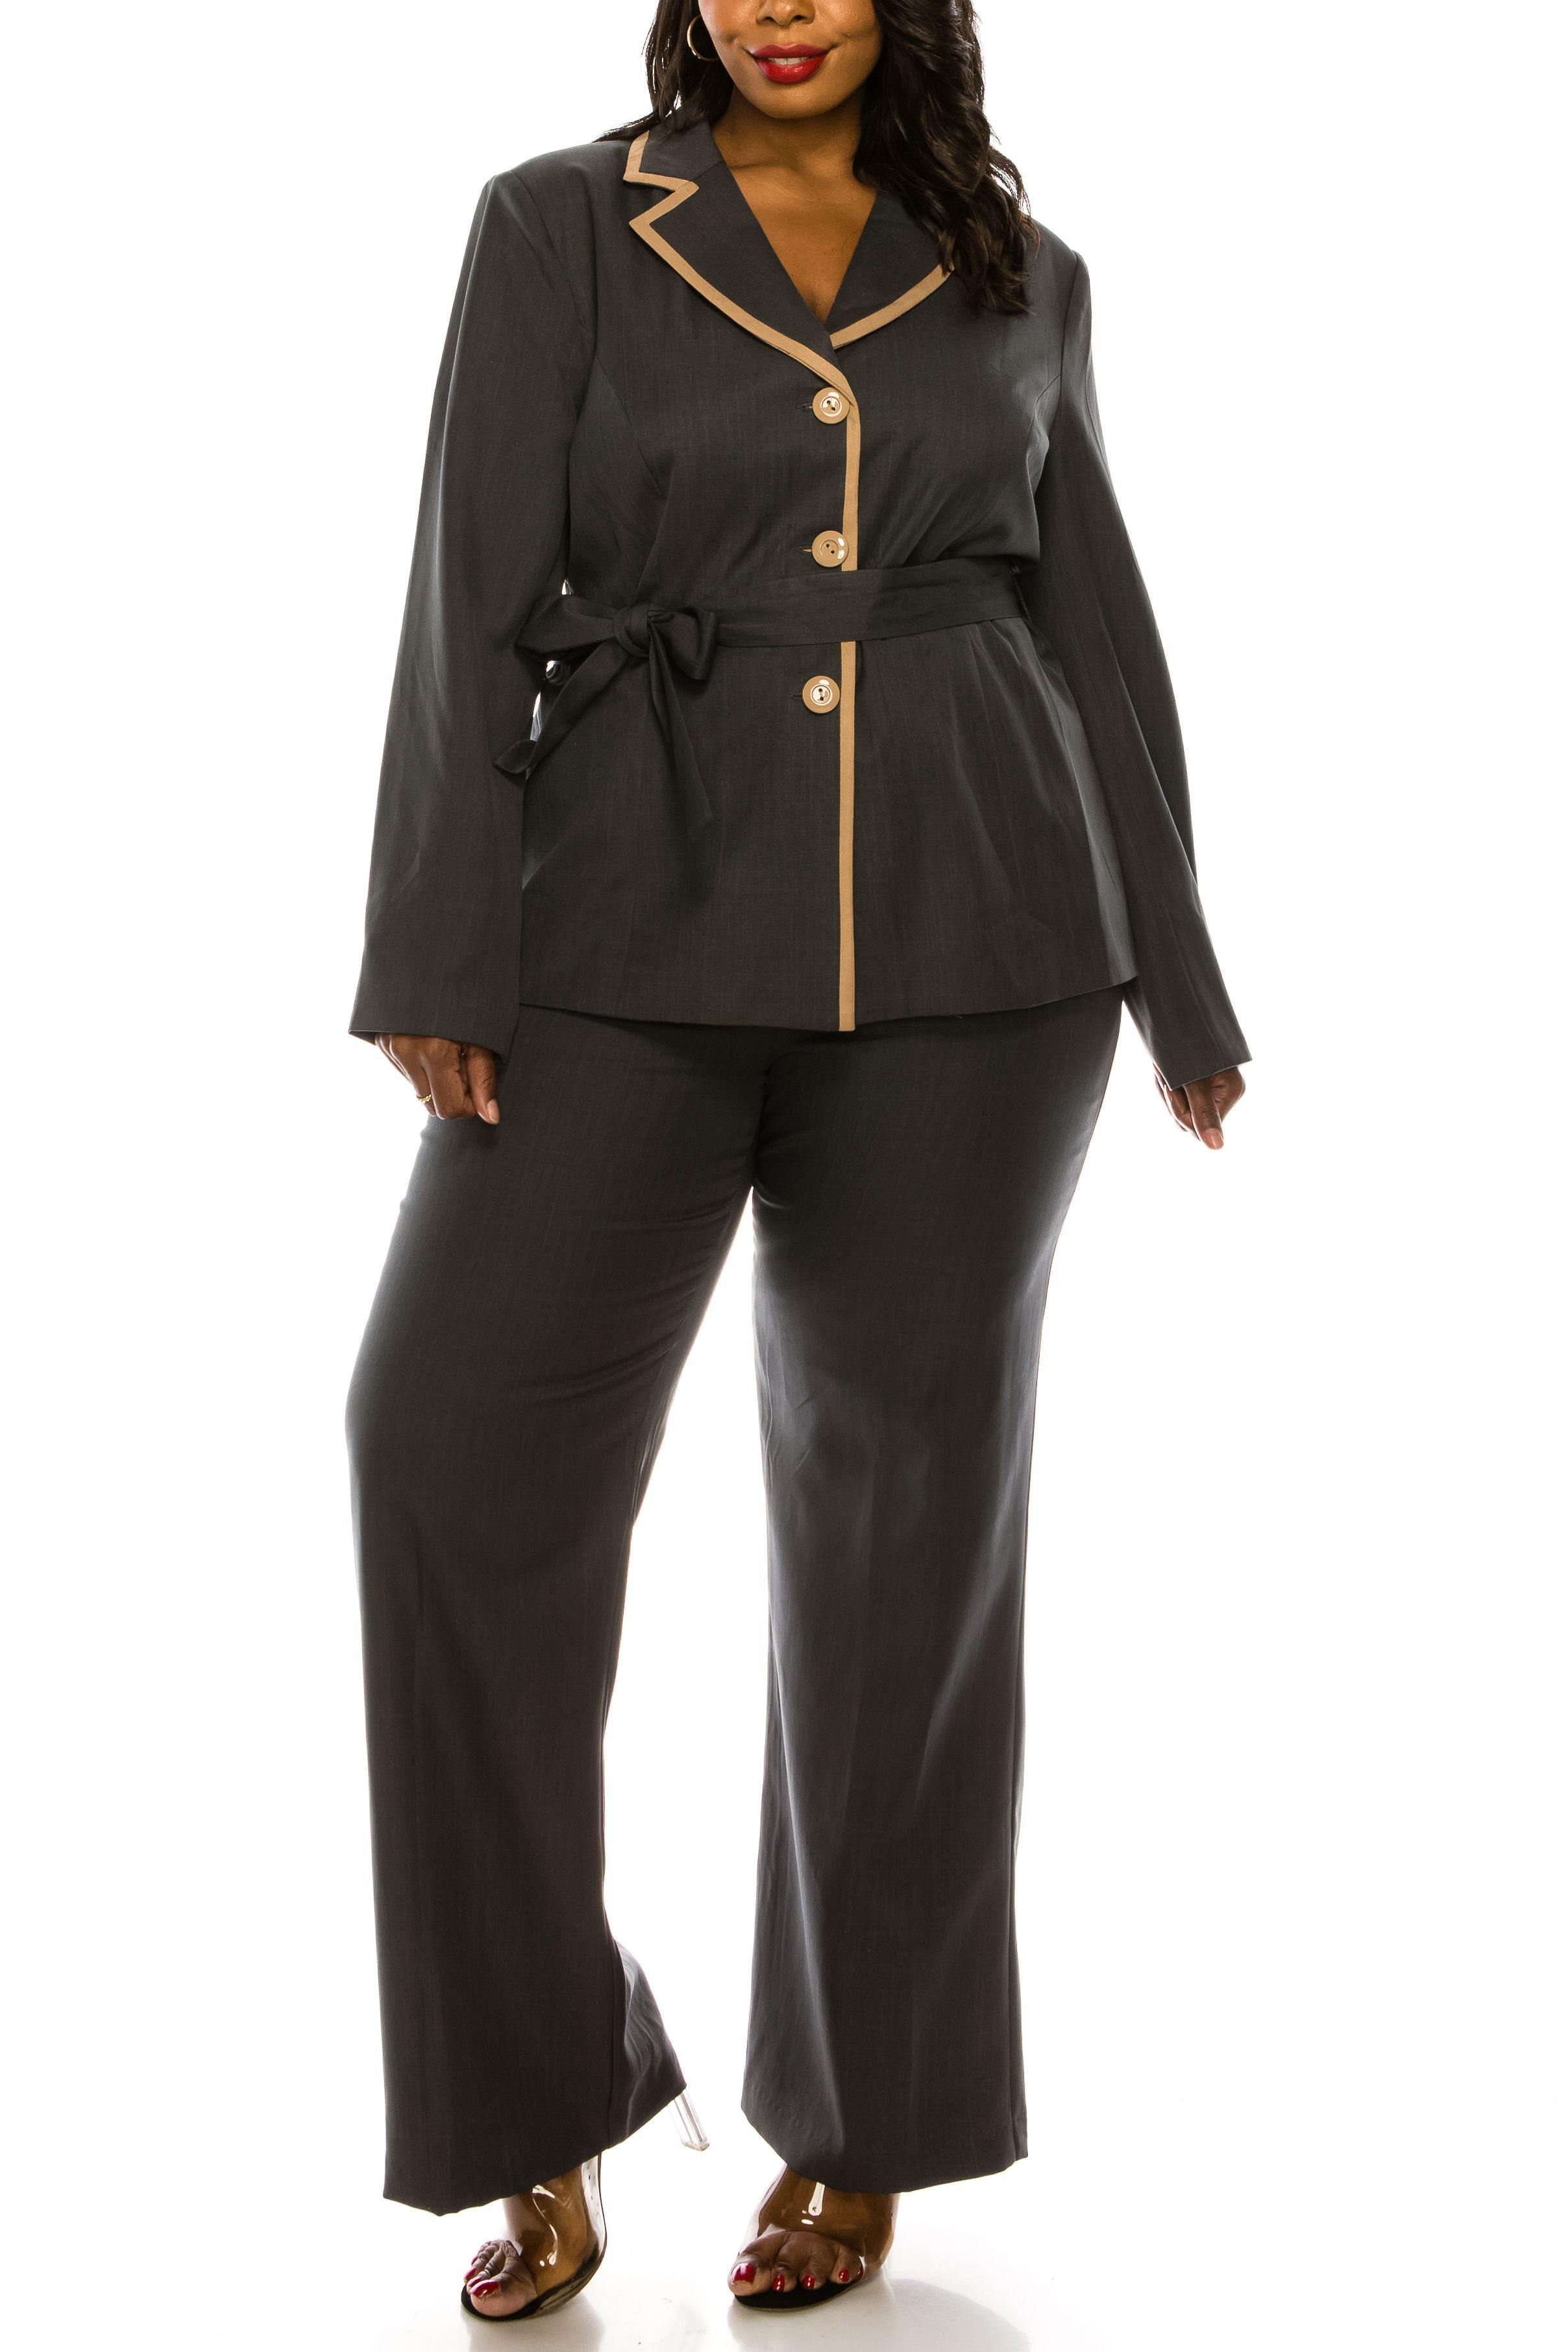 Danillo Formal Mother of the Bride Pant Suit 322186 - The Dress Outlet